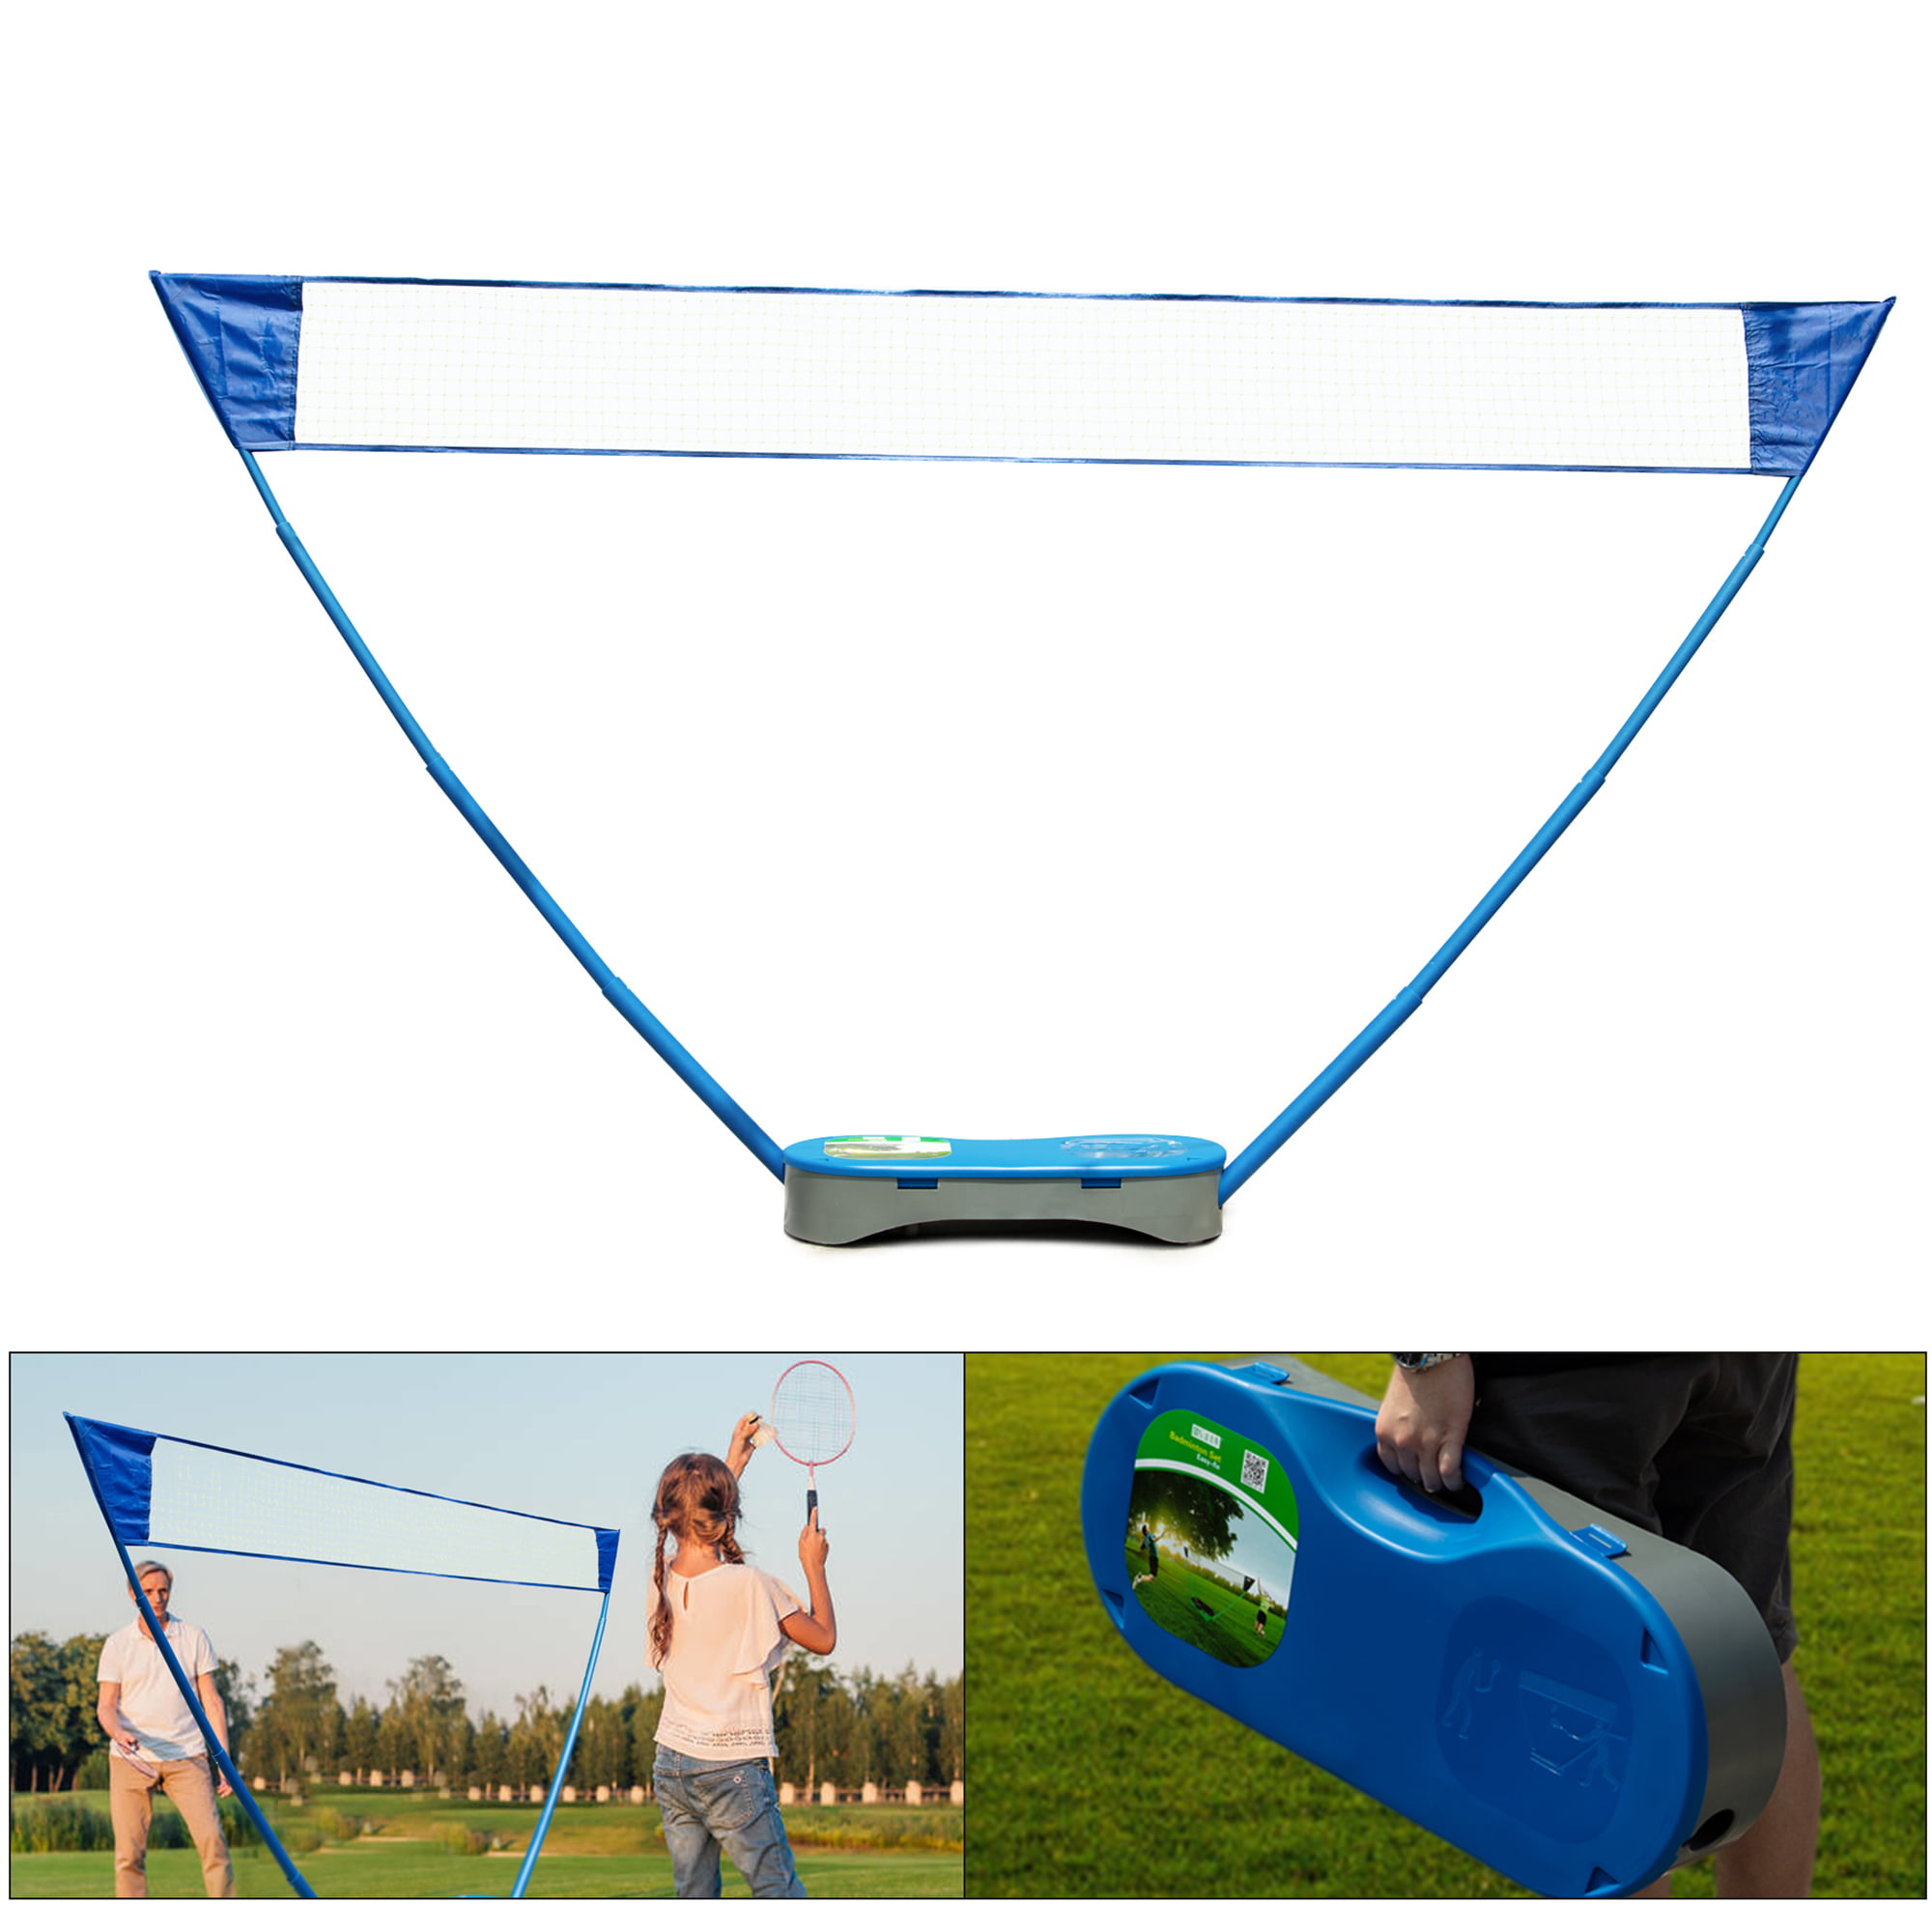 Details about    Portable Badminton Net Set with W/Freestanding Stand Recreation Game Equipment 